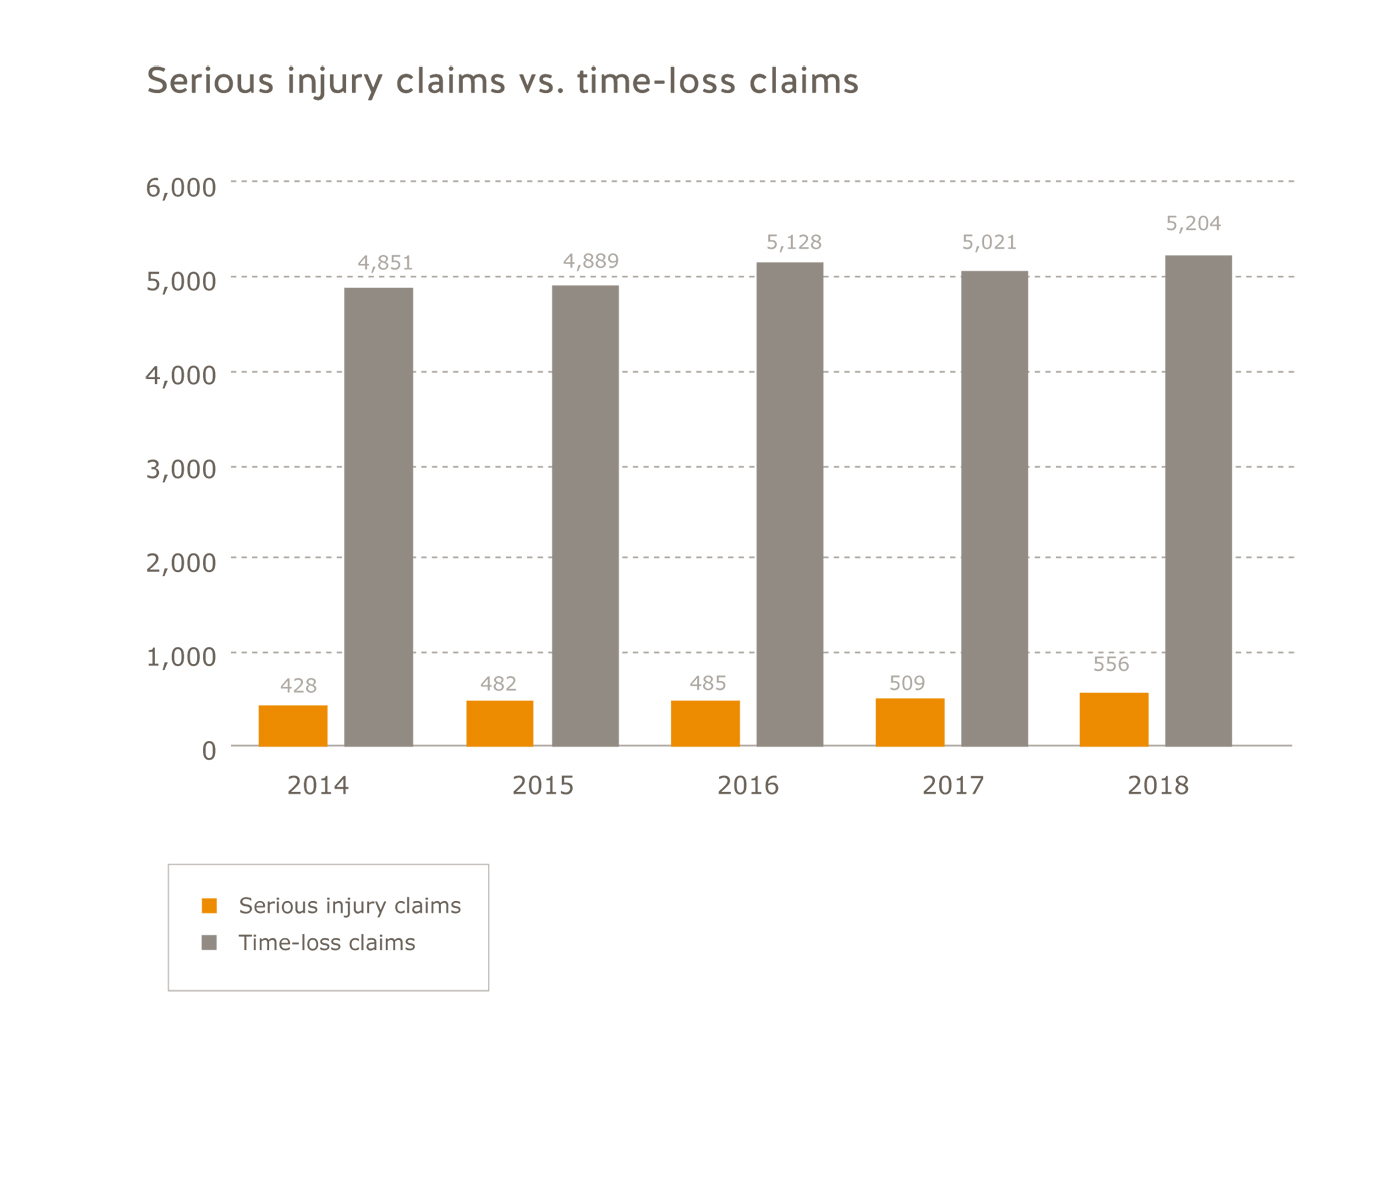 Retail industry serious injury claims vs. time-loss claims for 2014 to 2018. Serious injury claims: 2014=428; 2015=482; 2016=485; 2017=509; 2018=556. Time-loss claims: 2014=4,851, 2015=4,889; 2016=5,128; 2017=5,021;2018=5,204